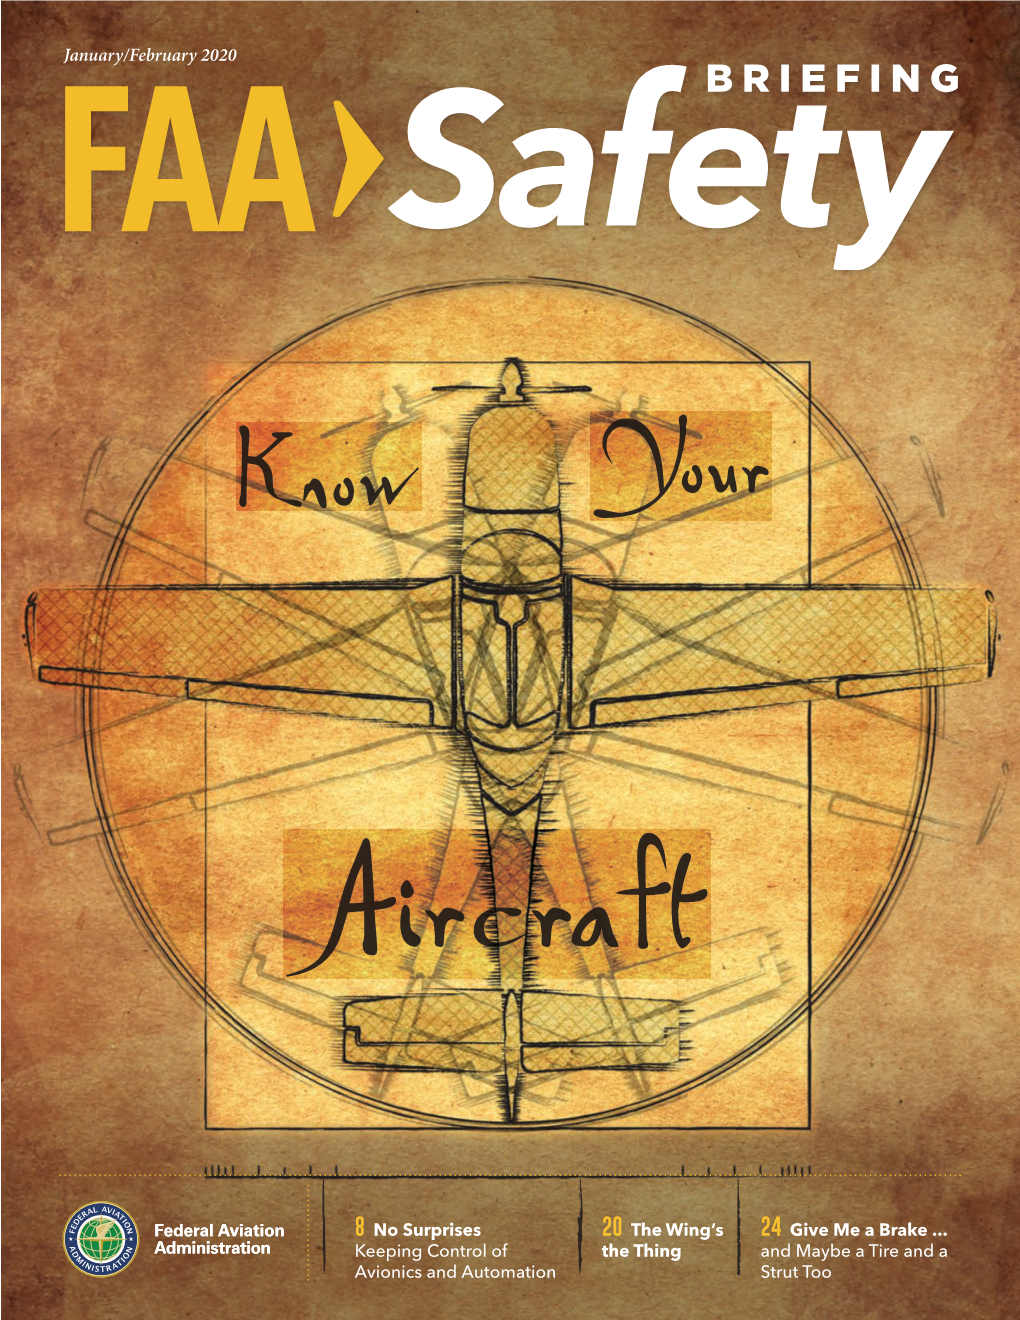 FAA Safety Briefing January/February 2020 Volume 60/Number 1